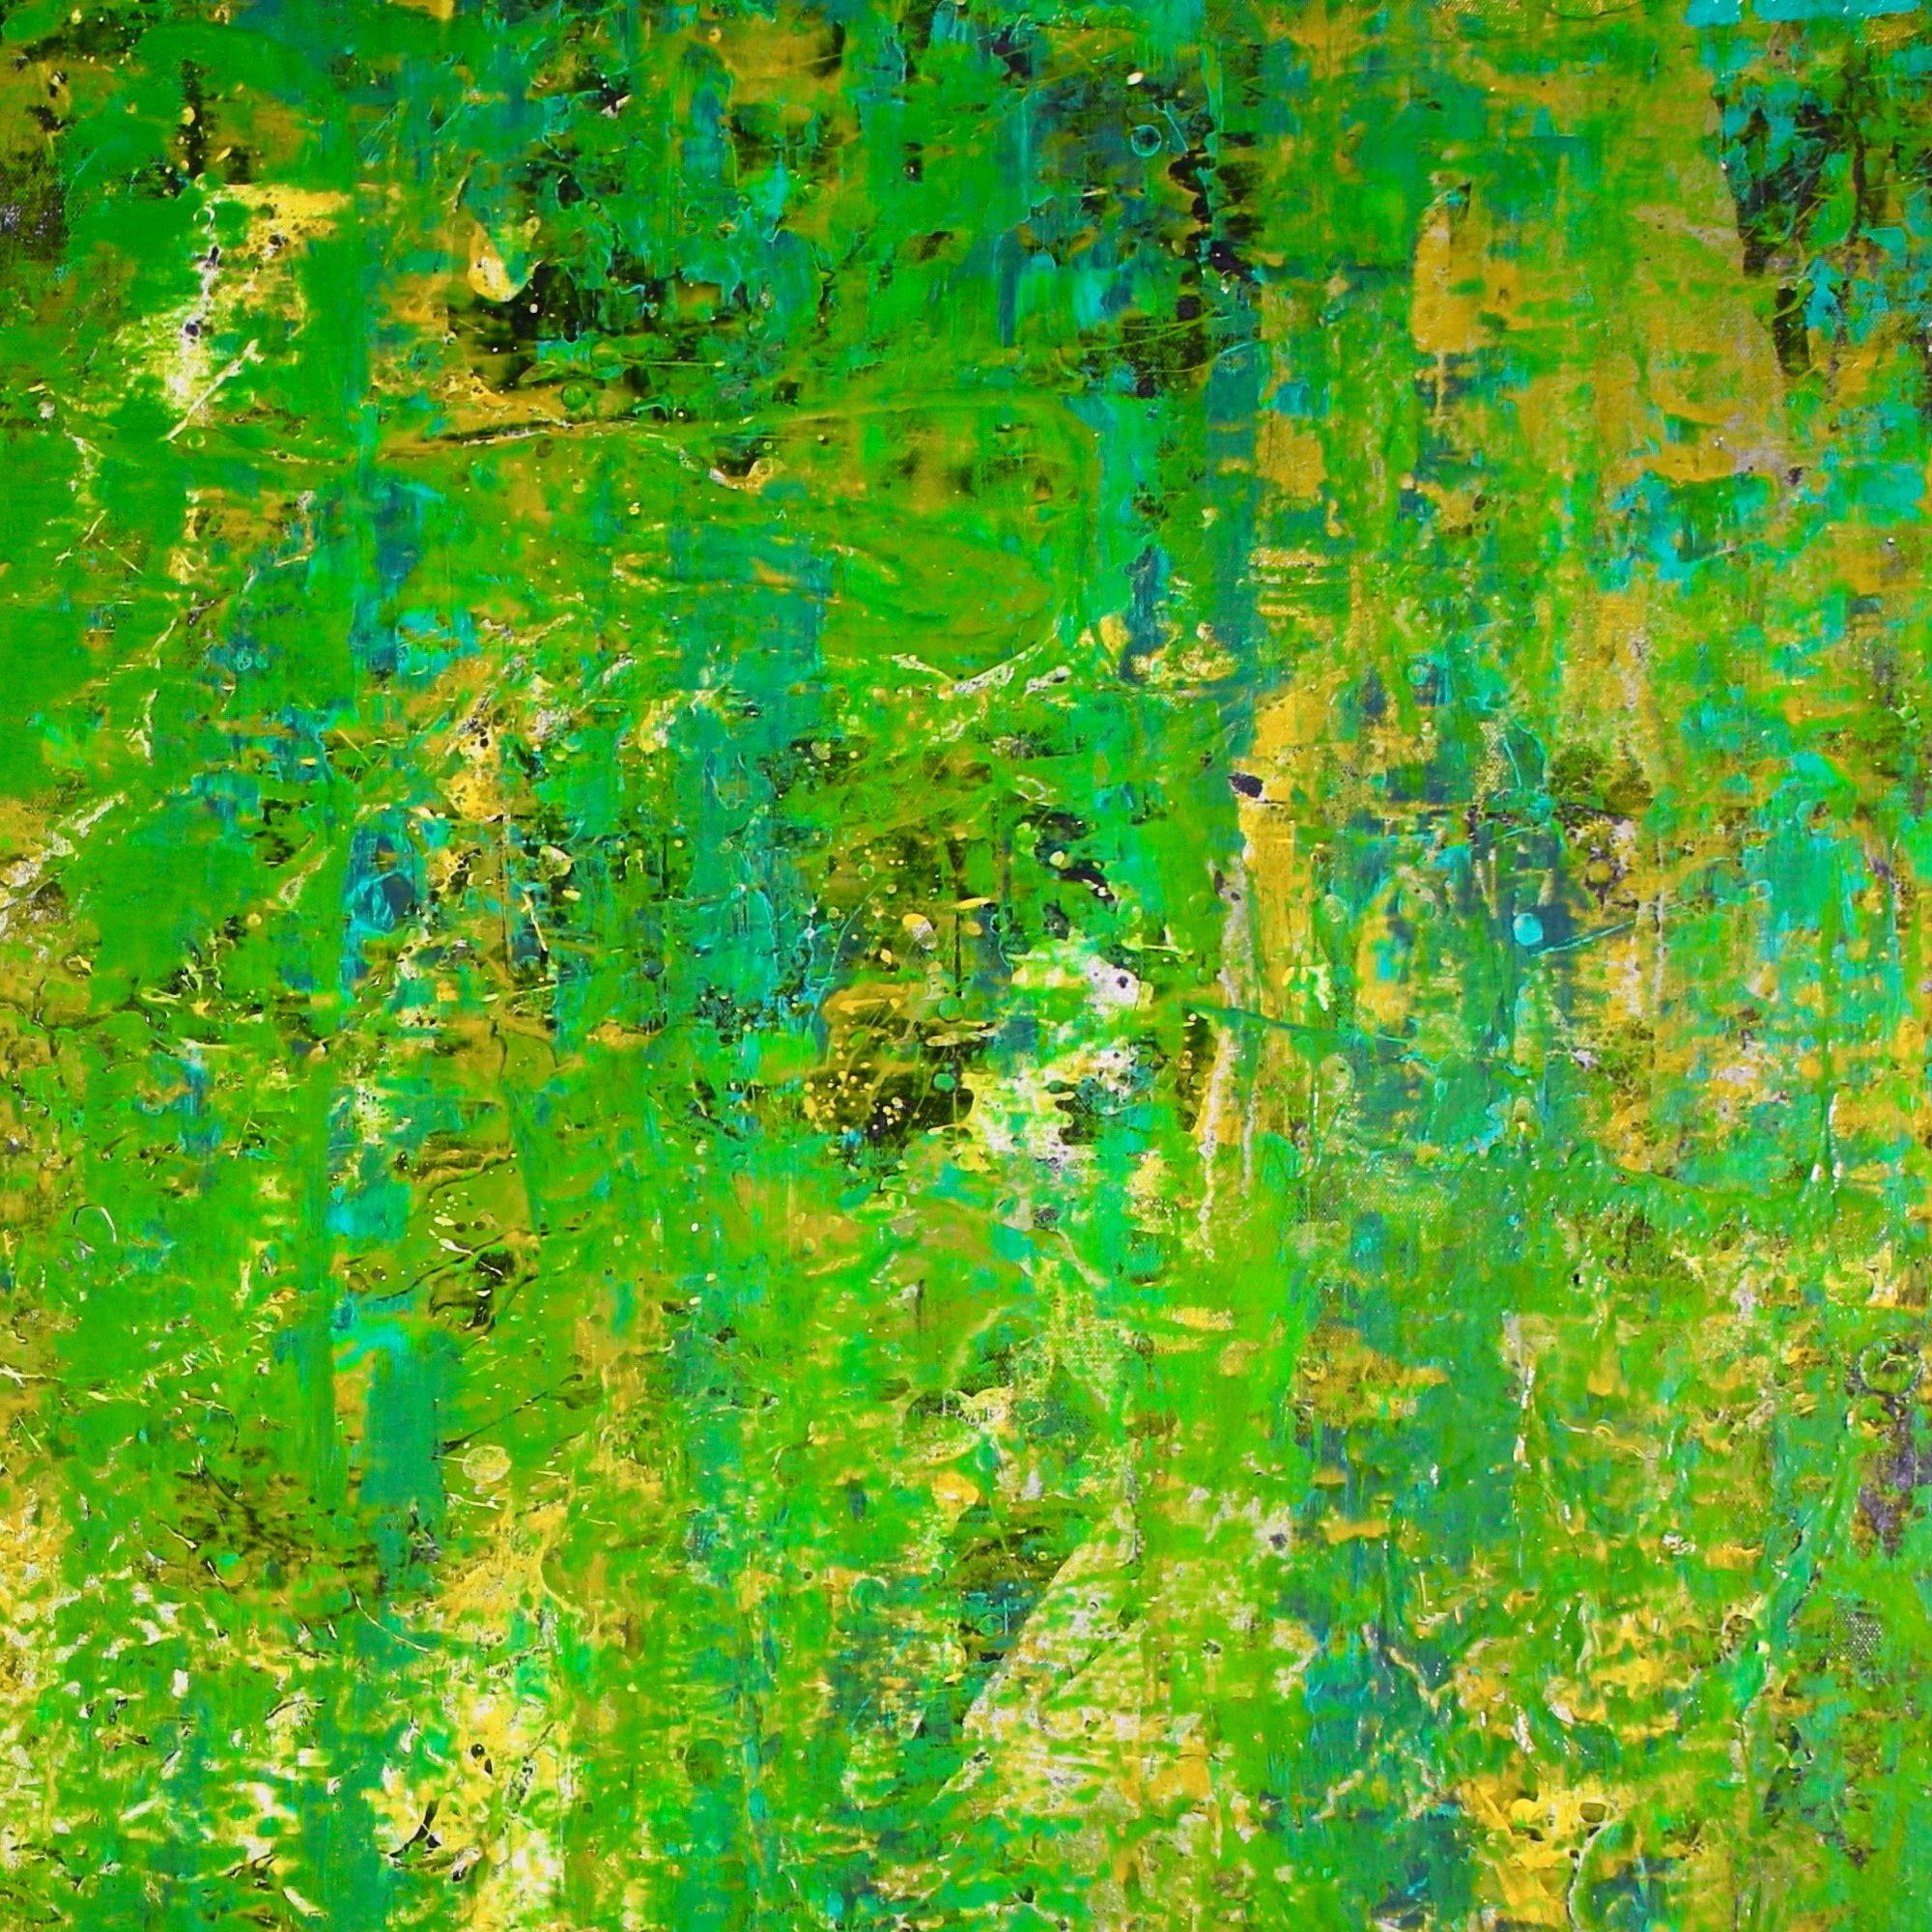 Abstract painting the result of layers of color blending, undertones, gestural shapes to make a very deep and contemplative green dream landscape. Pigments and colors used for this piece contain mica particles and graphite for depth. Signed on the